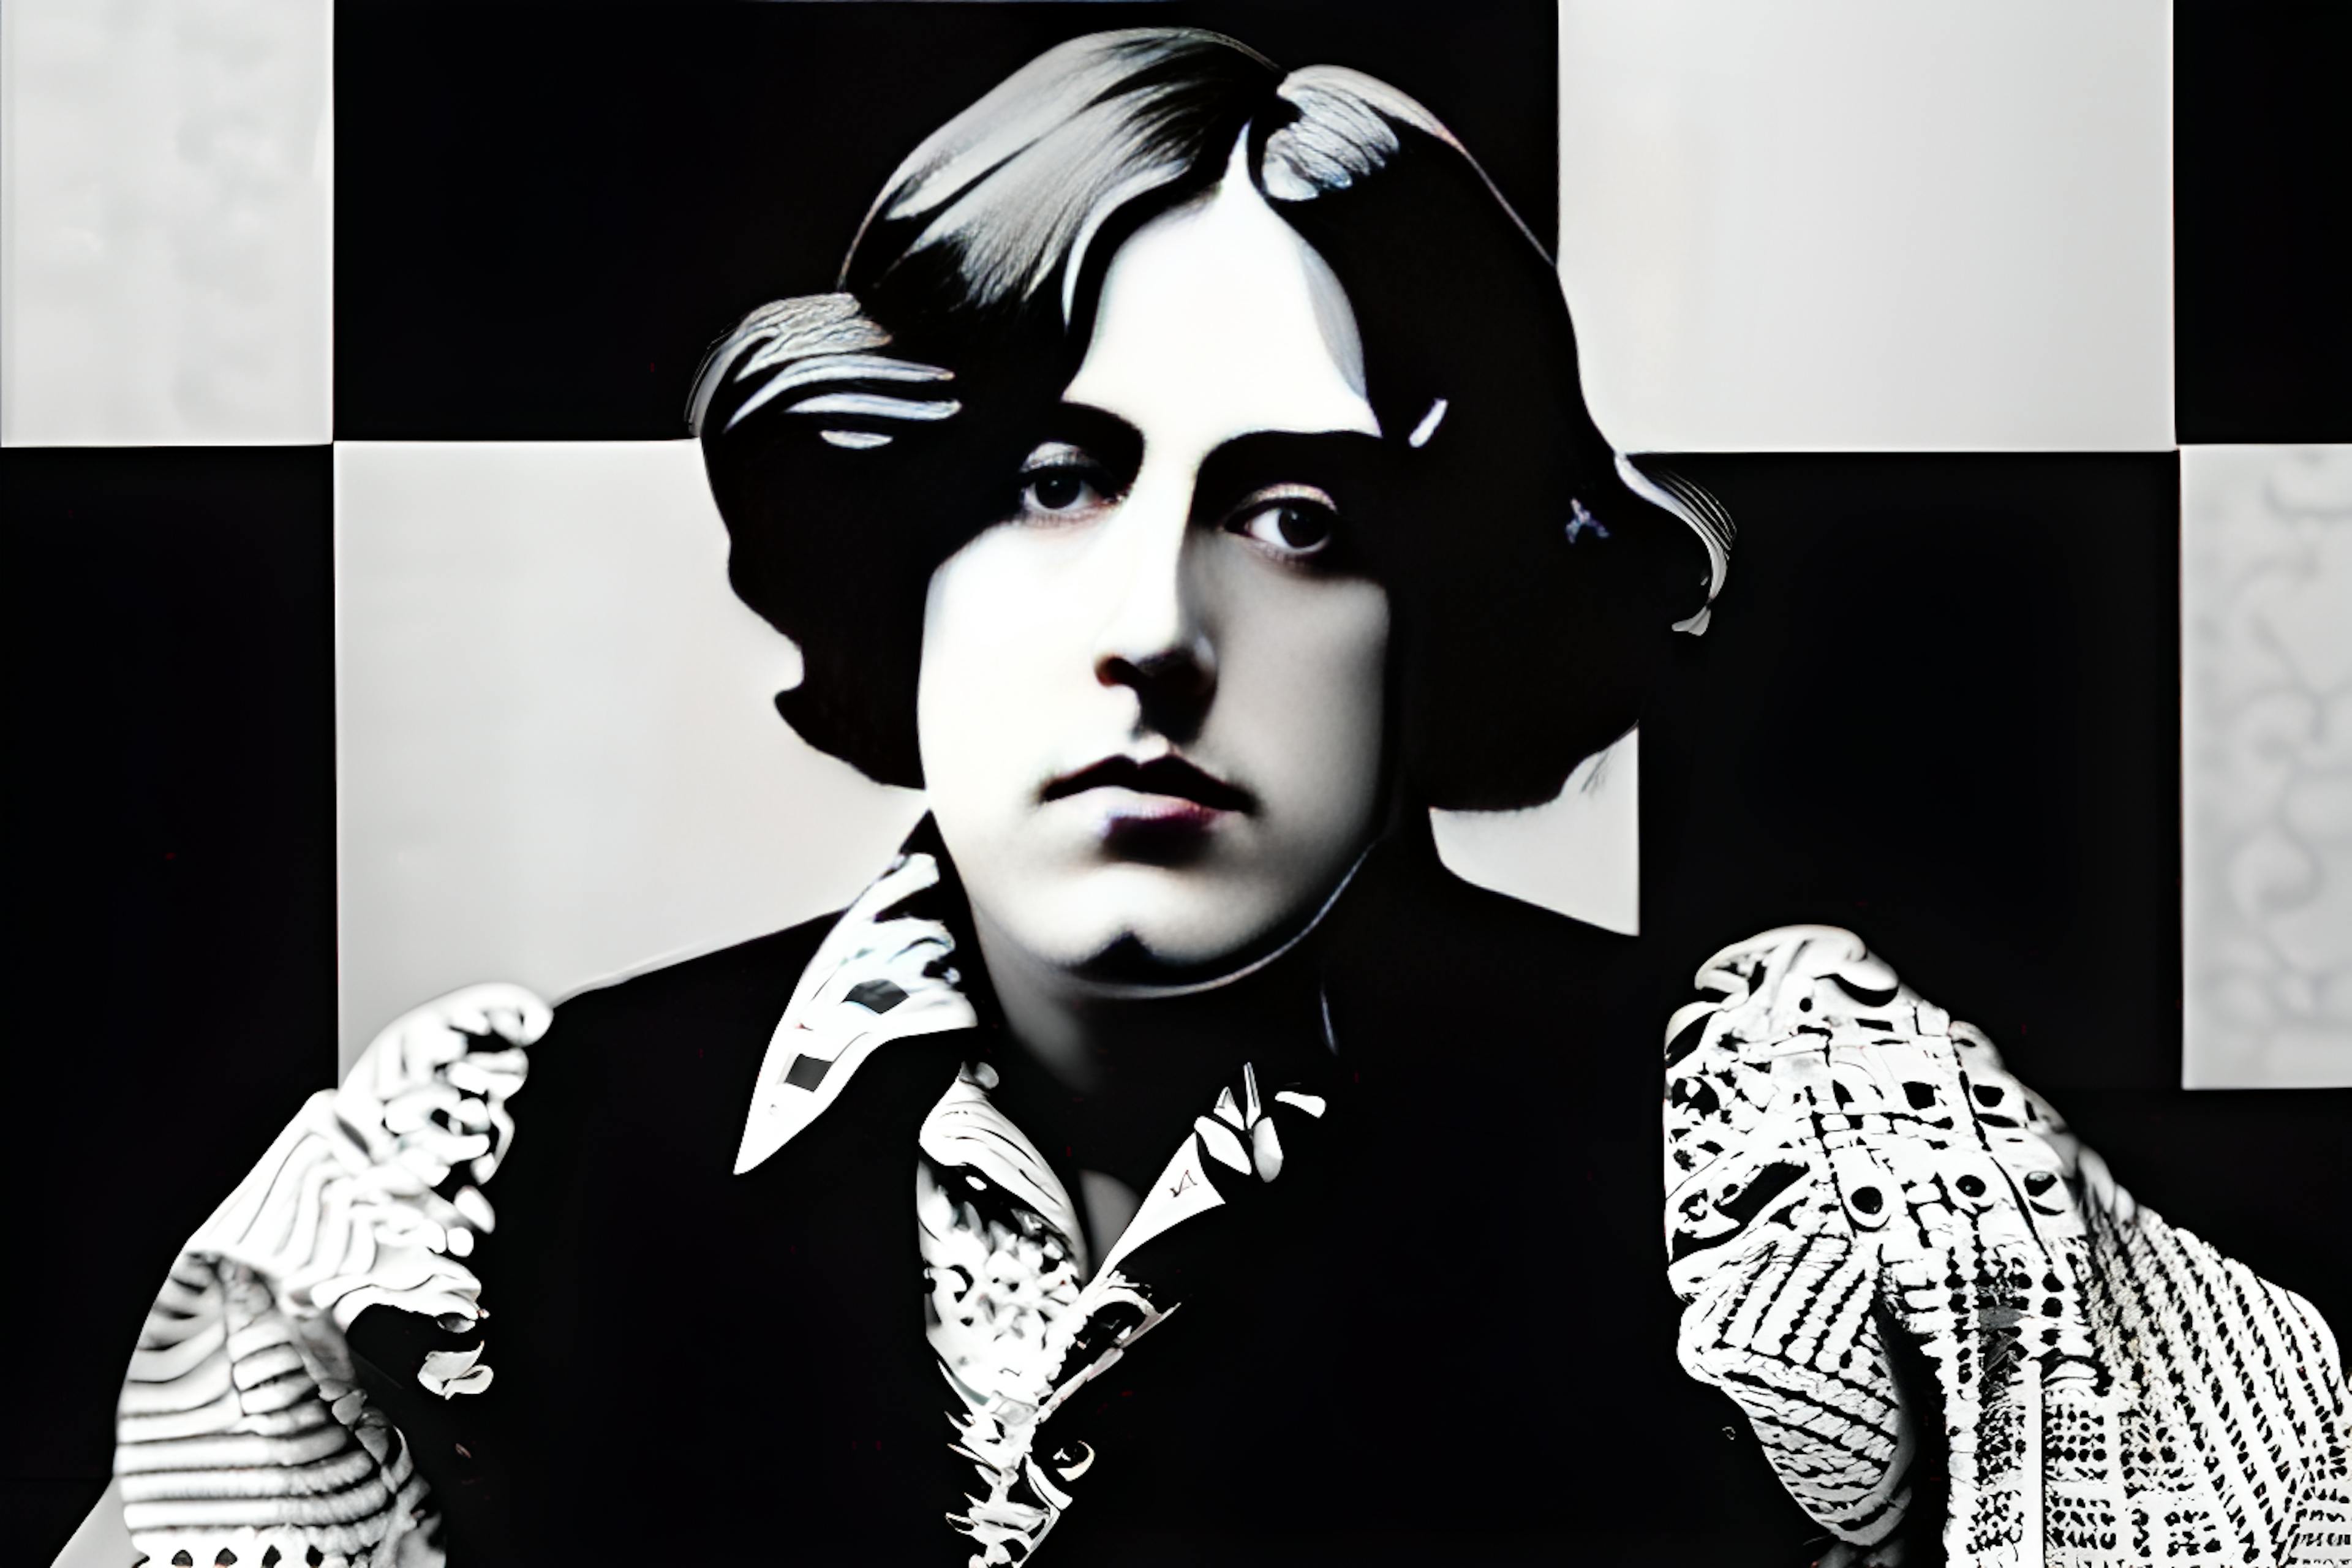 featured image - “Oscar Wilde No.18,” the Photograph That Redefined Copyright Law